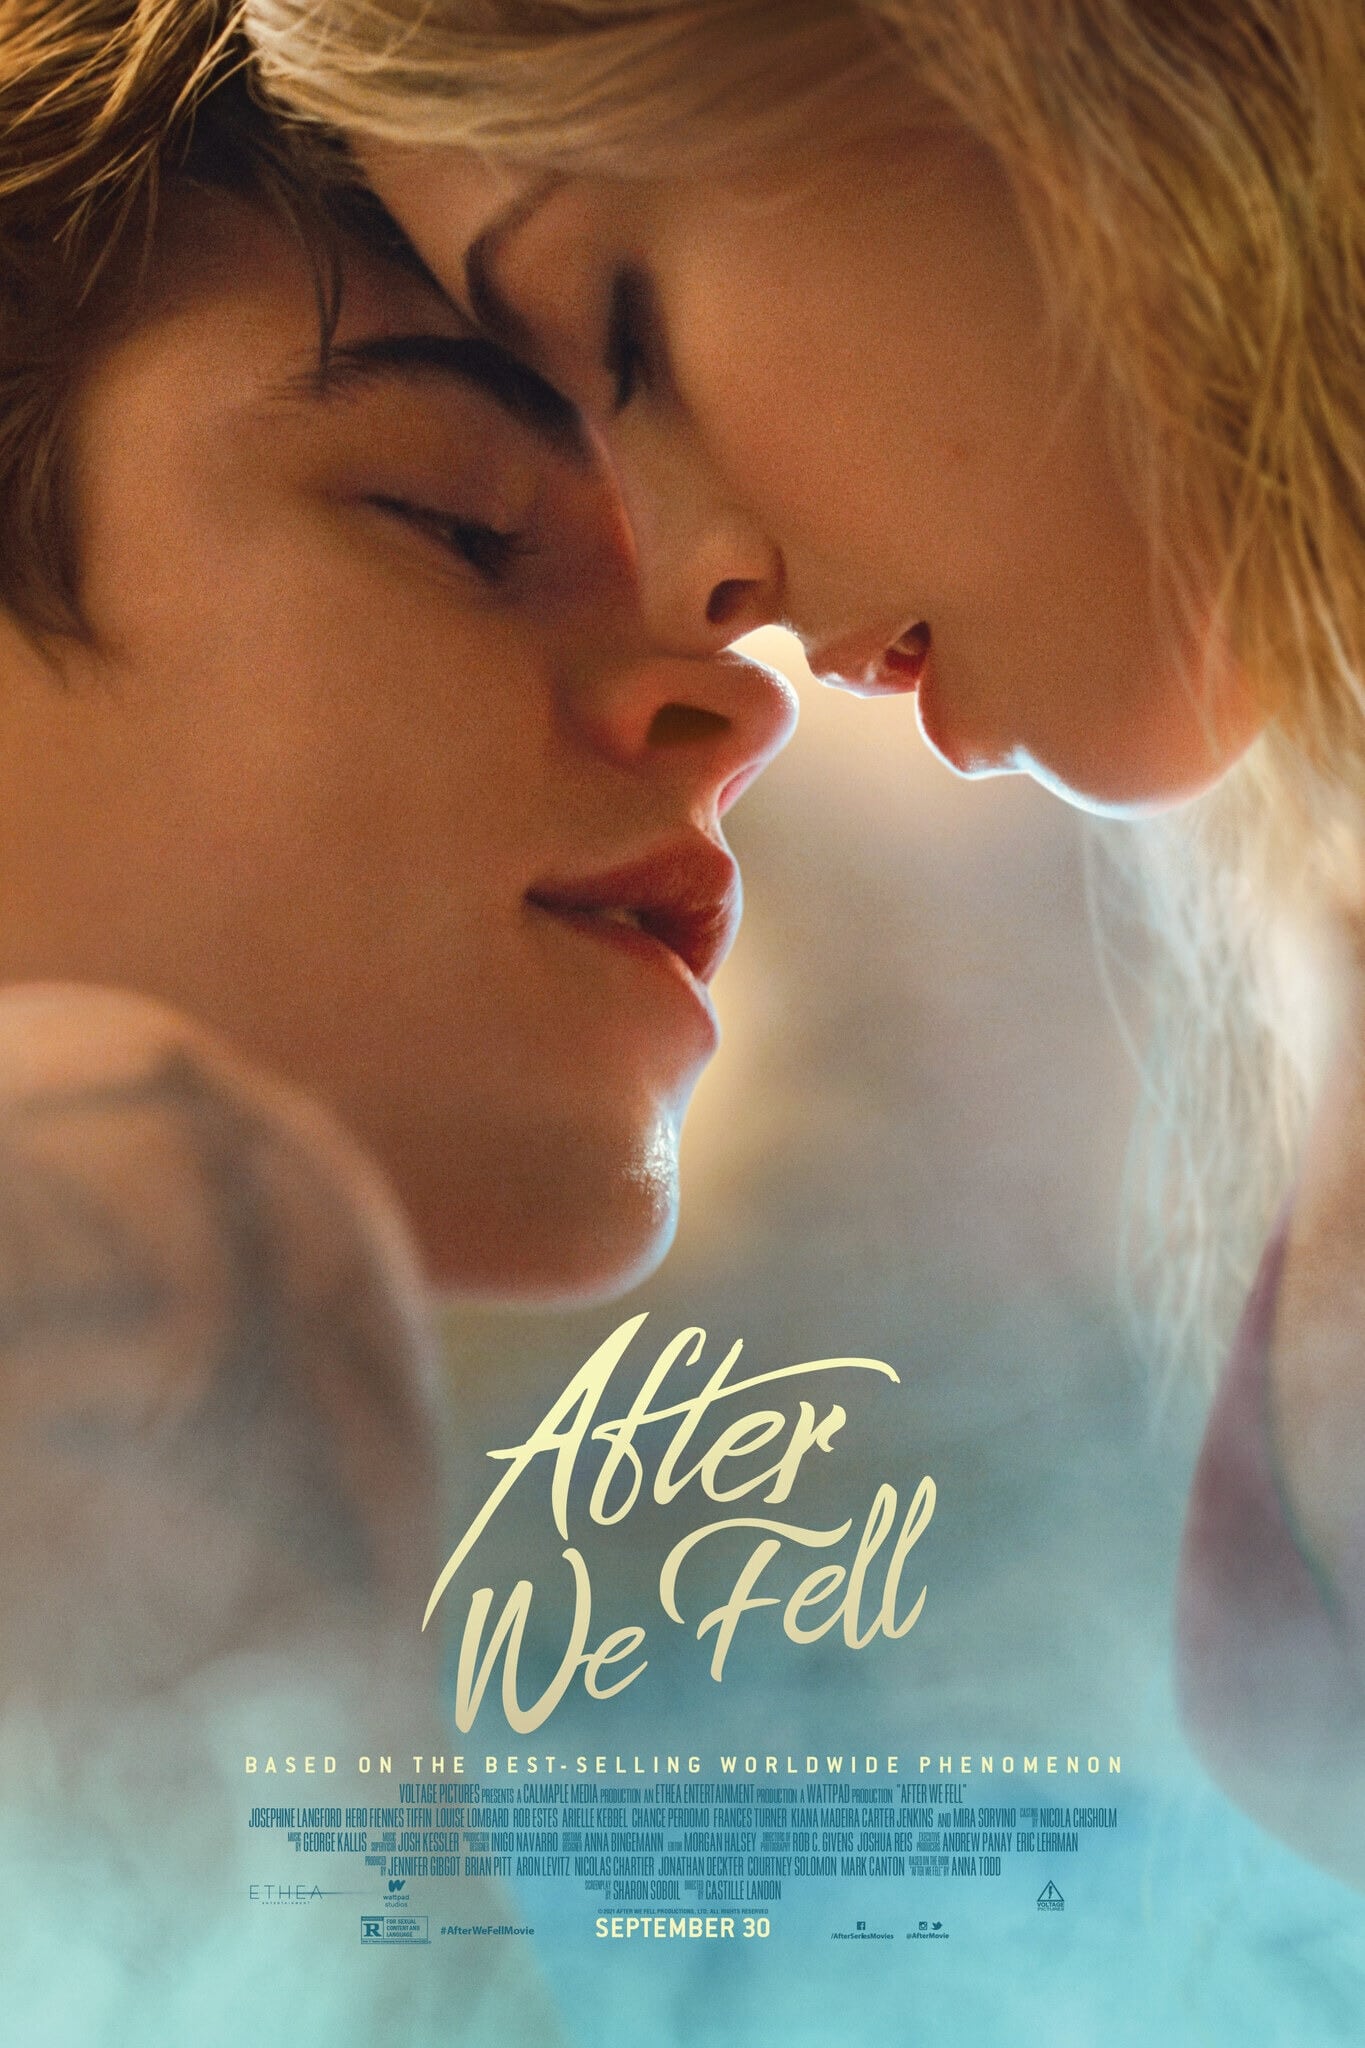 Poster for the movie "After We Fell"